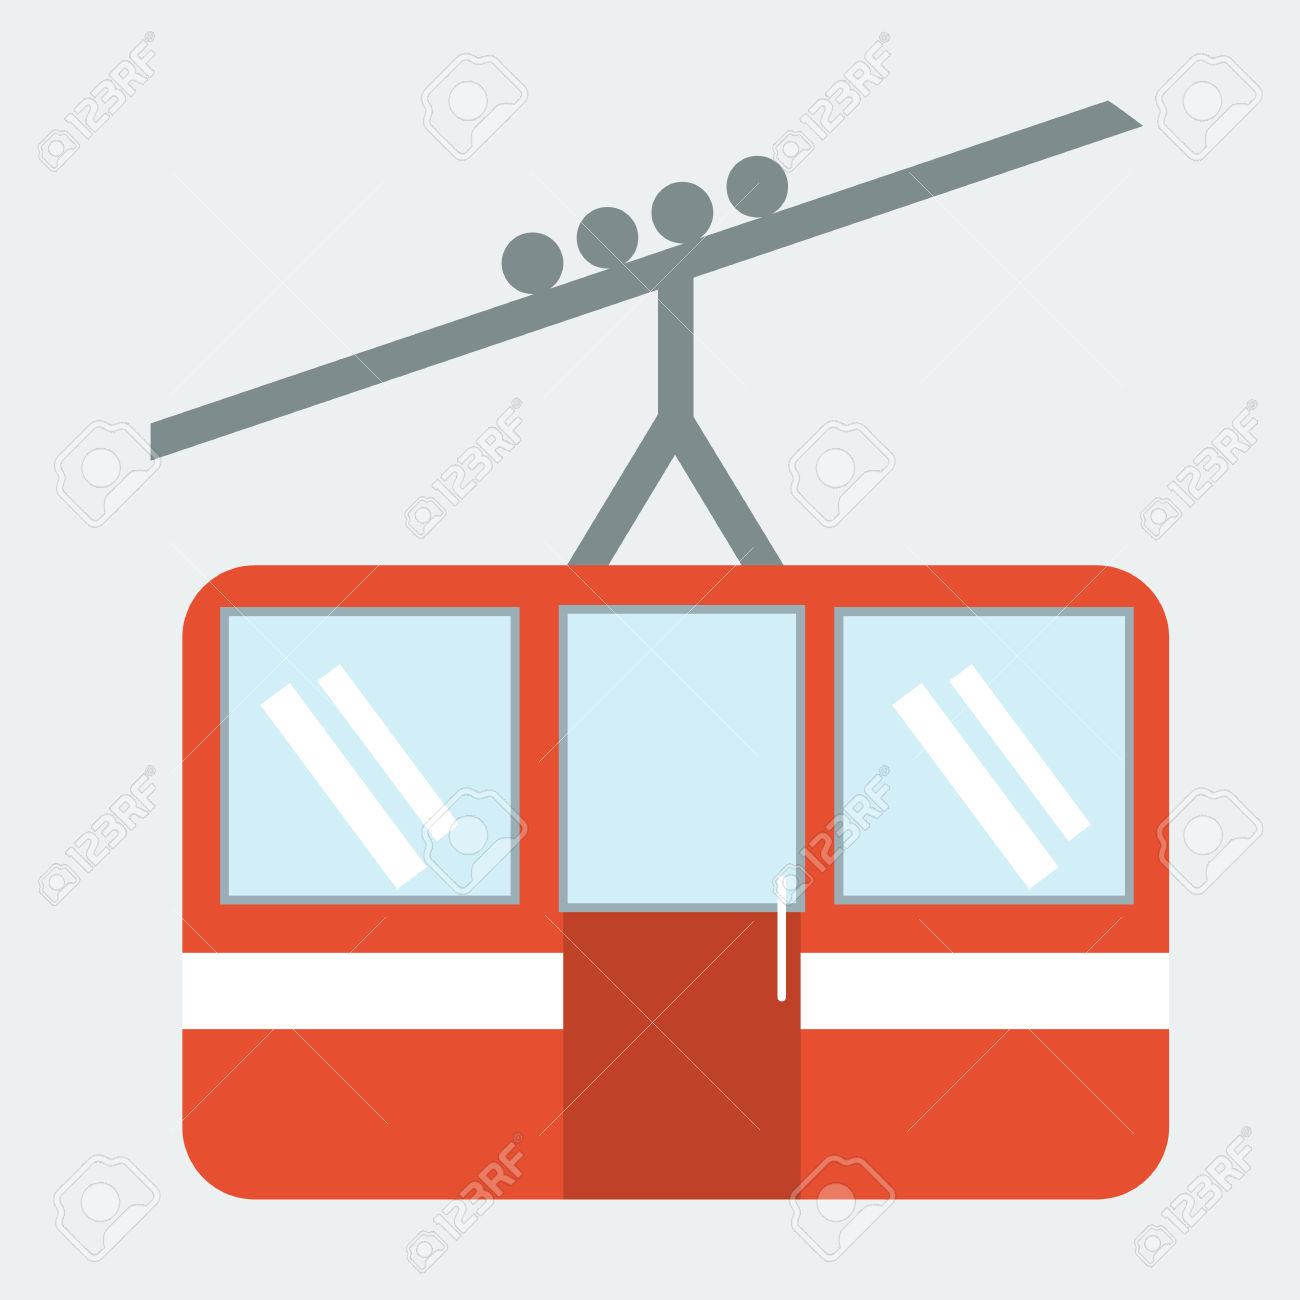 Funicular Cable Car Illustration Royalty Free Cliparts, Vectors.